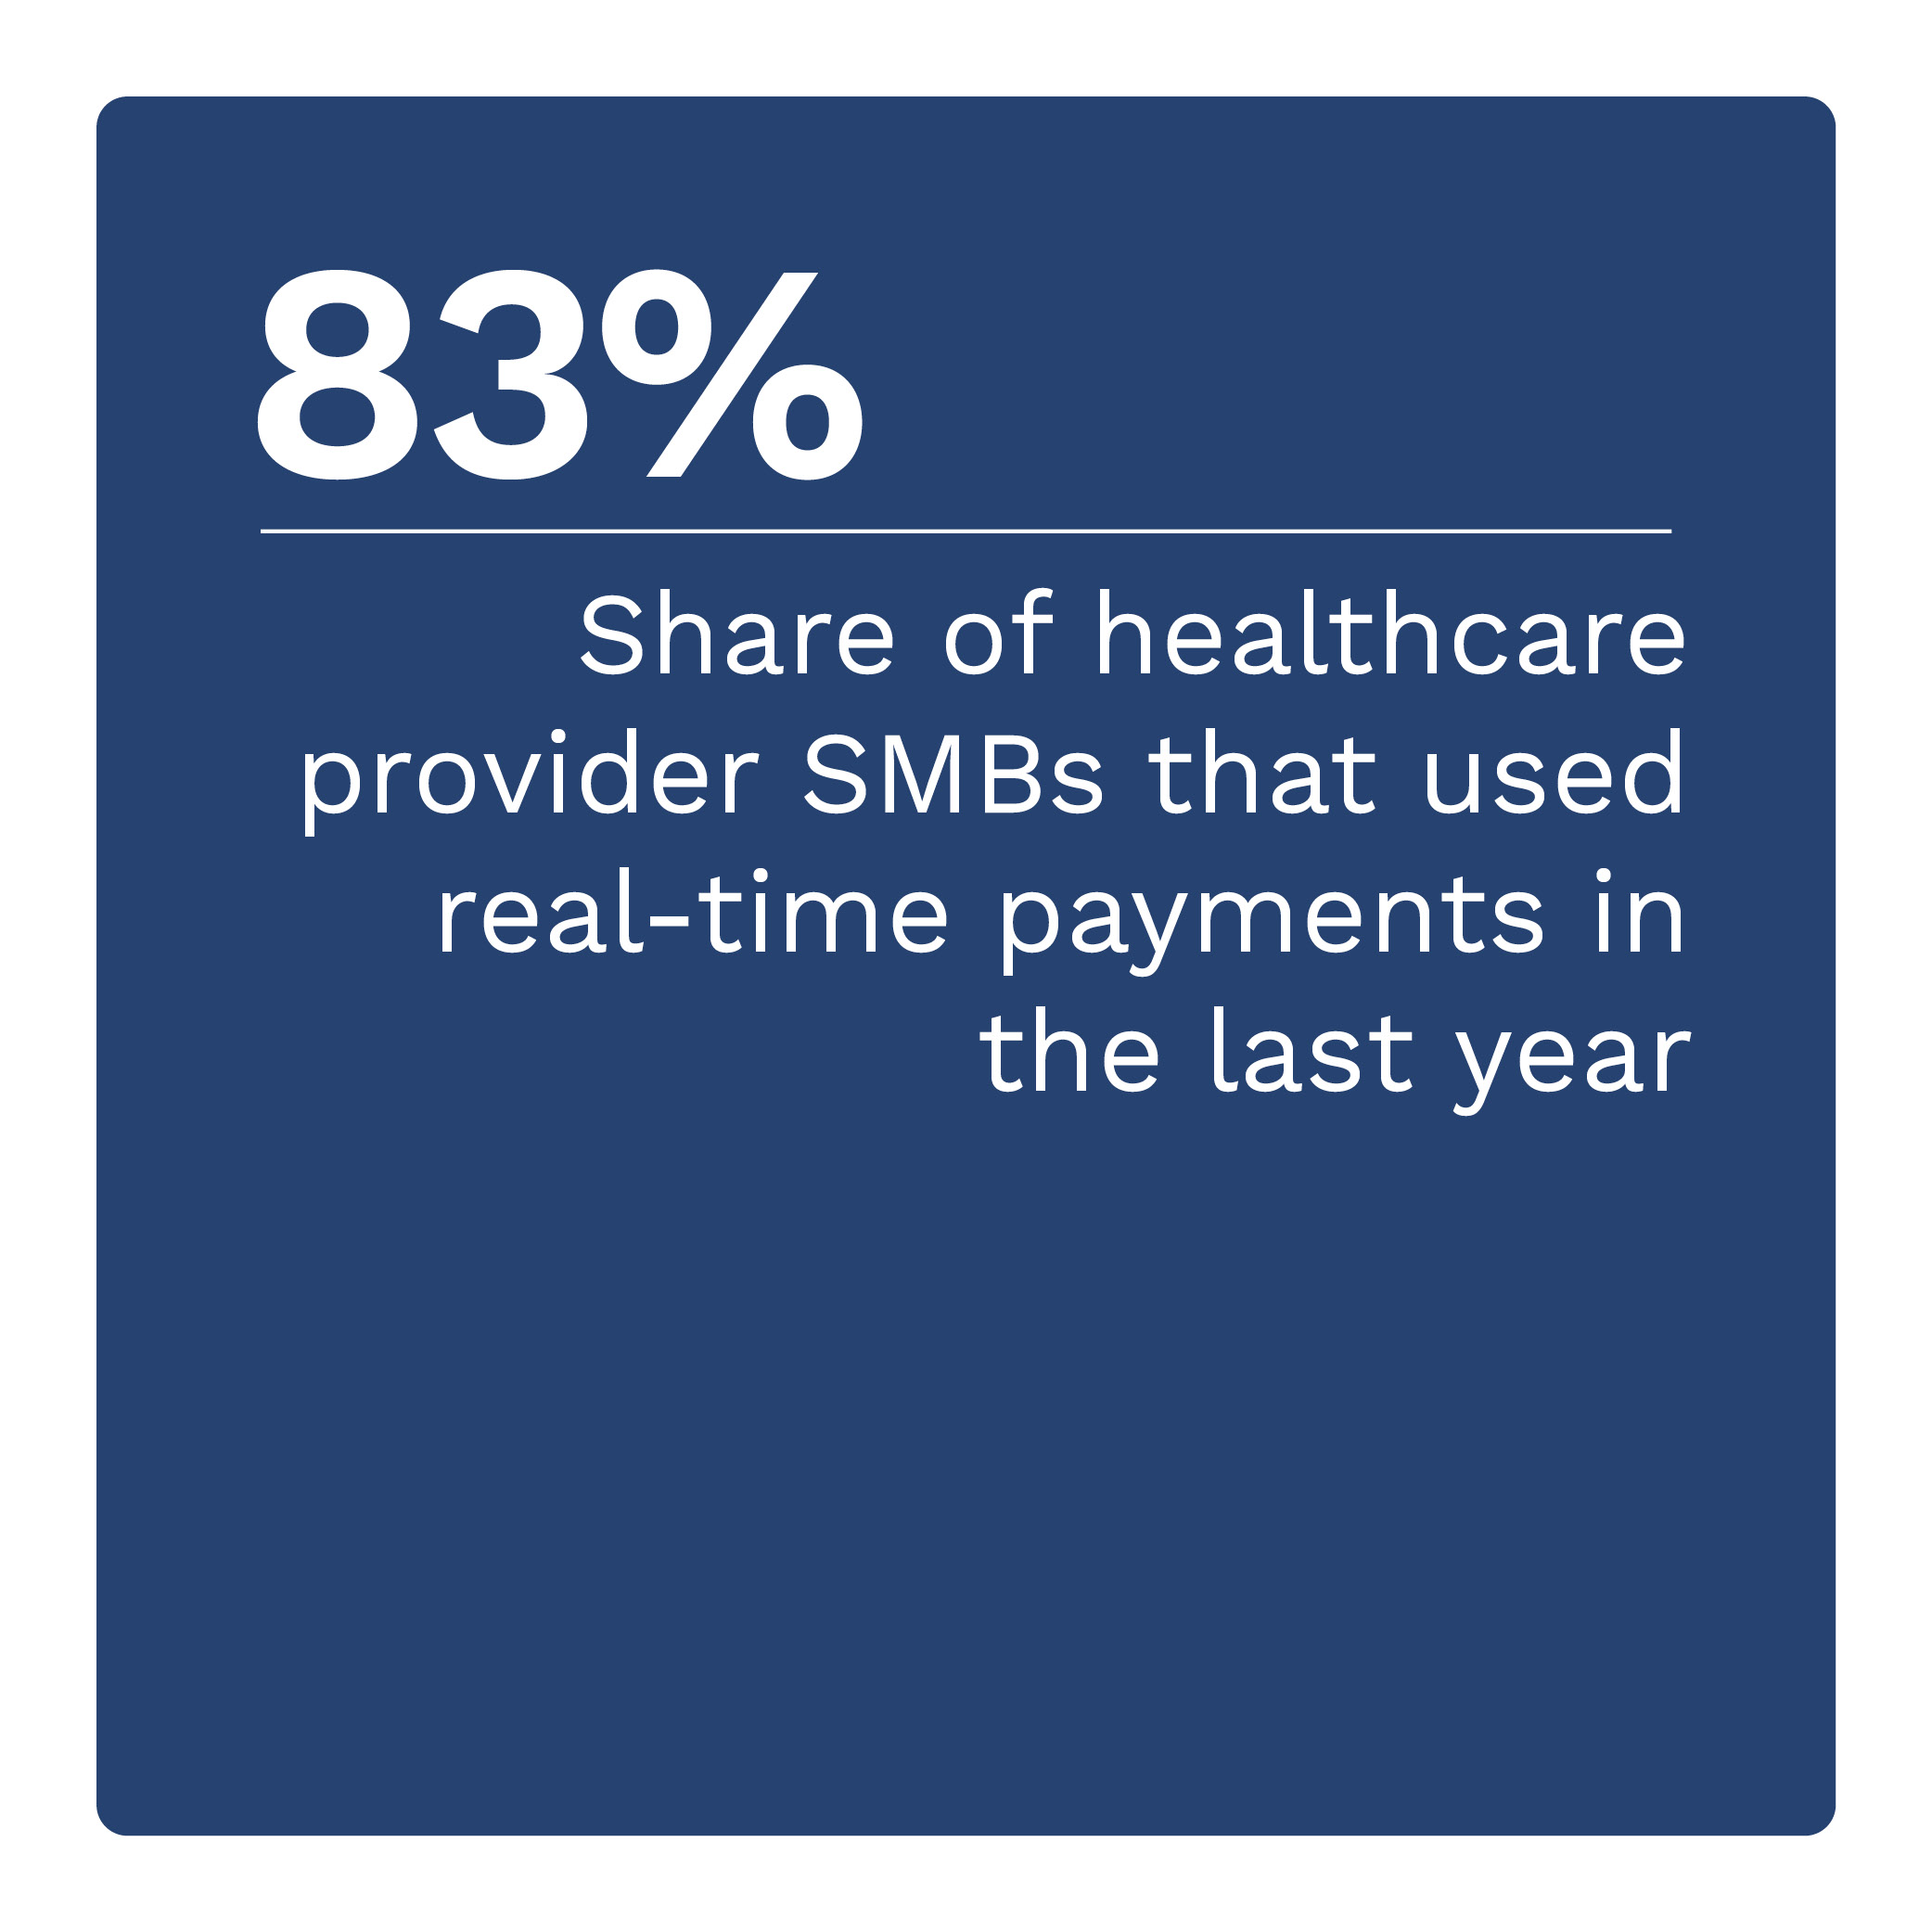  Share of healthcare provider SMBs that used real-time payments in the last year